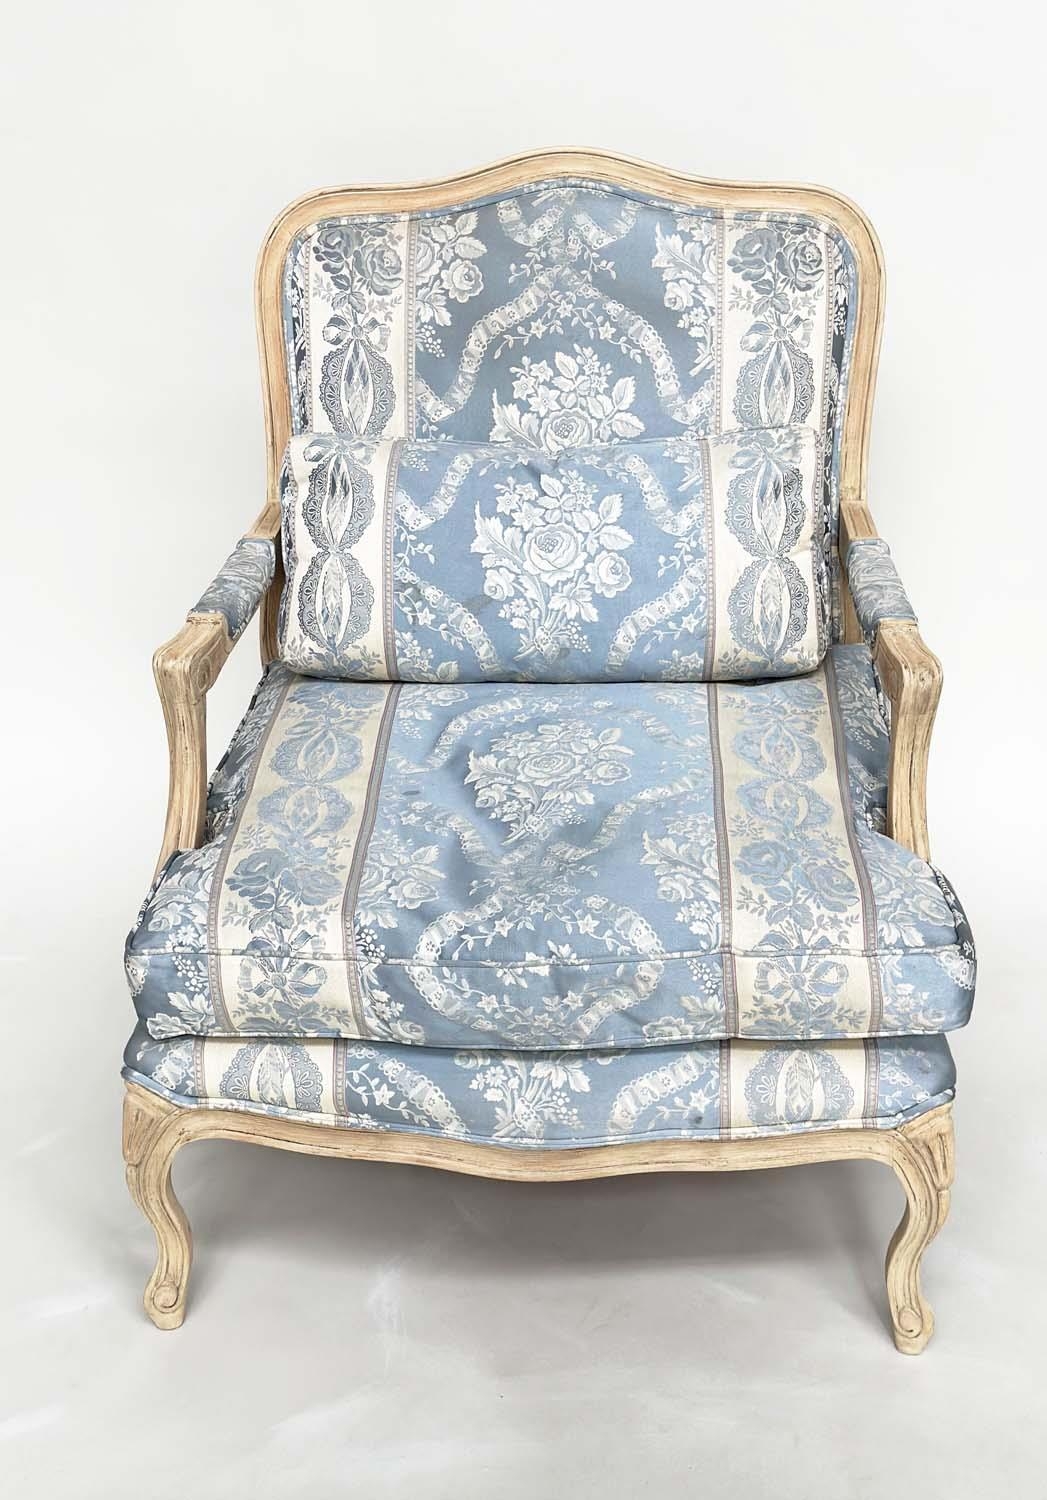 FAUTEUIL, French Louis XV style fruitwood with woven smoke blue and cream upholstery. - Image 3 of 6